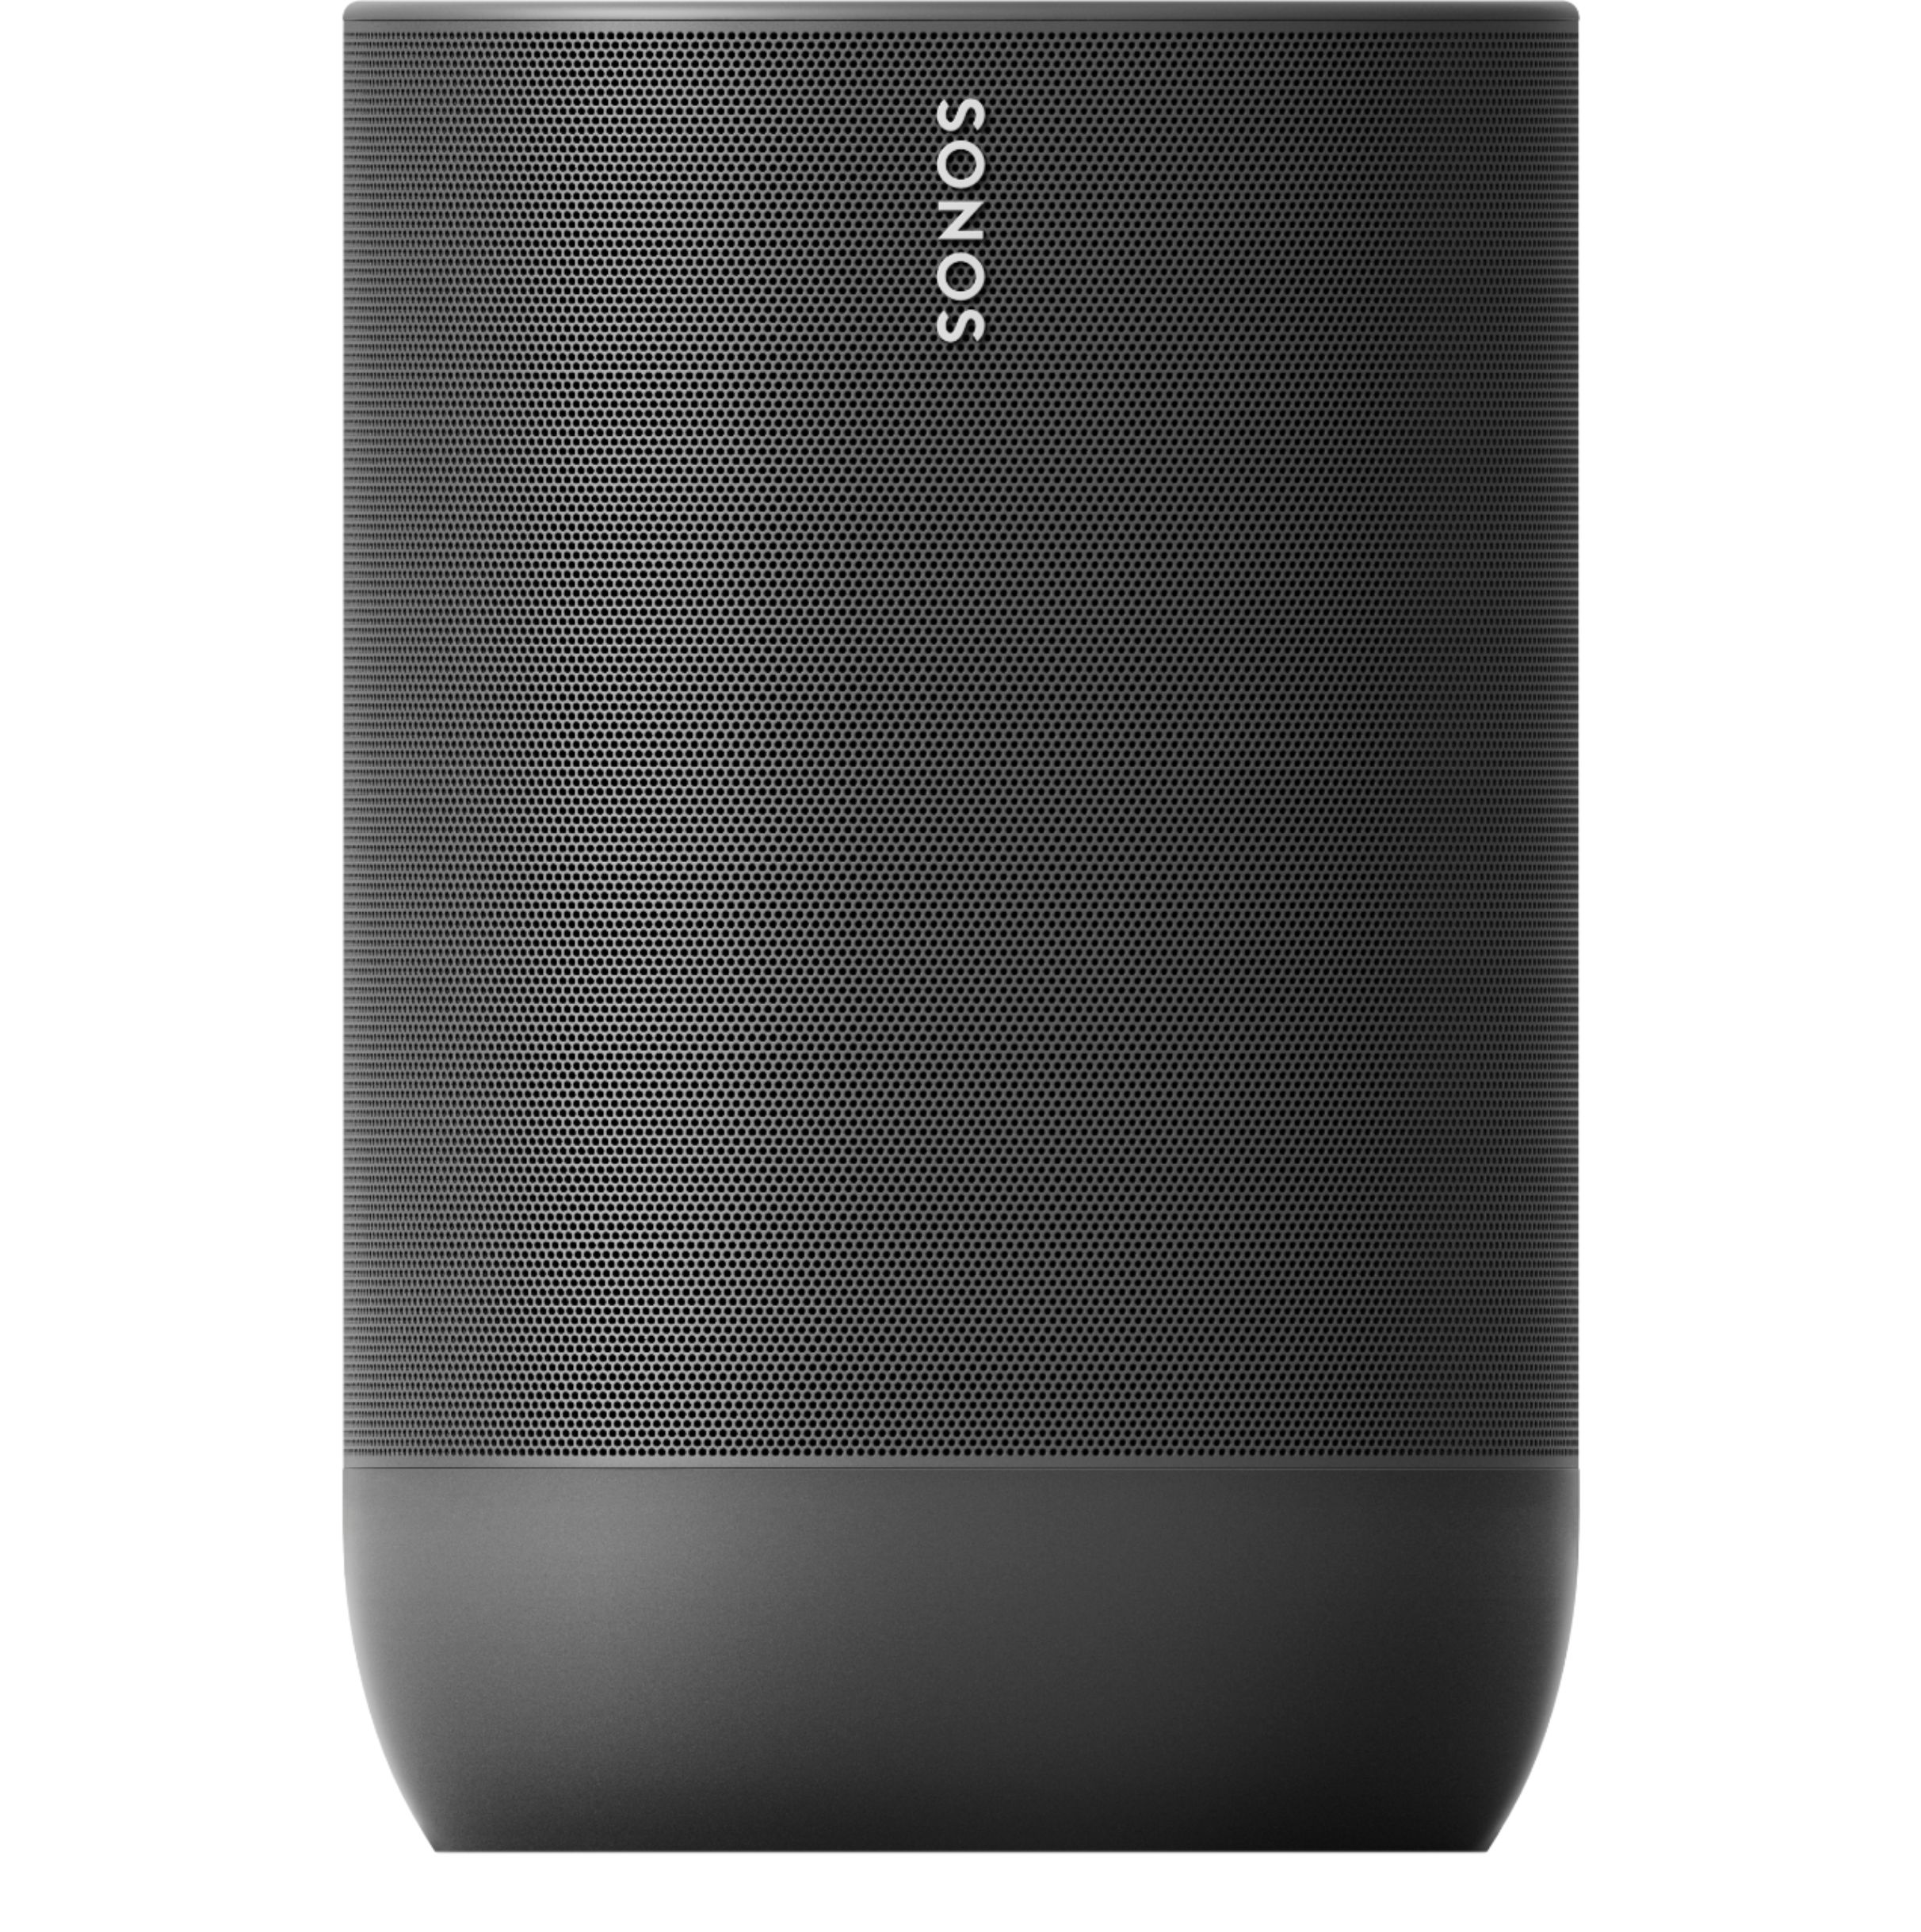 Sonos Move Smart Portable Wi-Fi and Bluetooth Speaker with Alexa and Google  Assistant Black MOVE1US1BLK - Best Buy